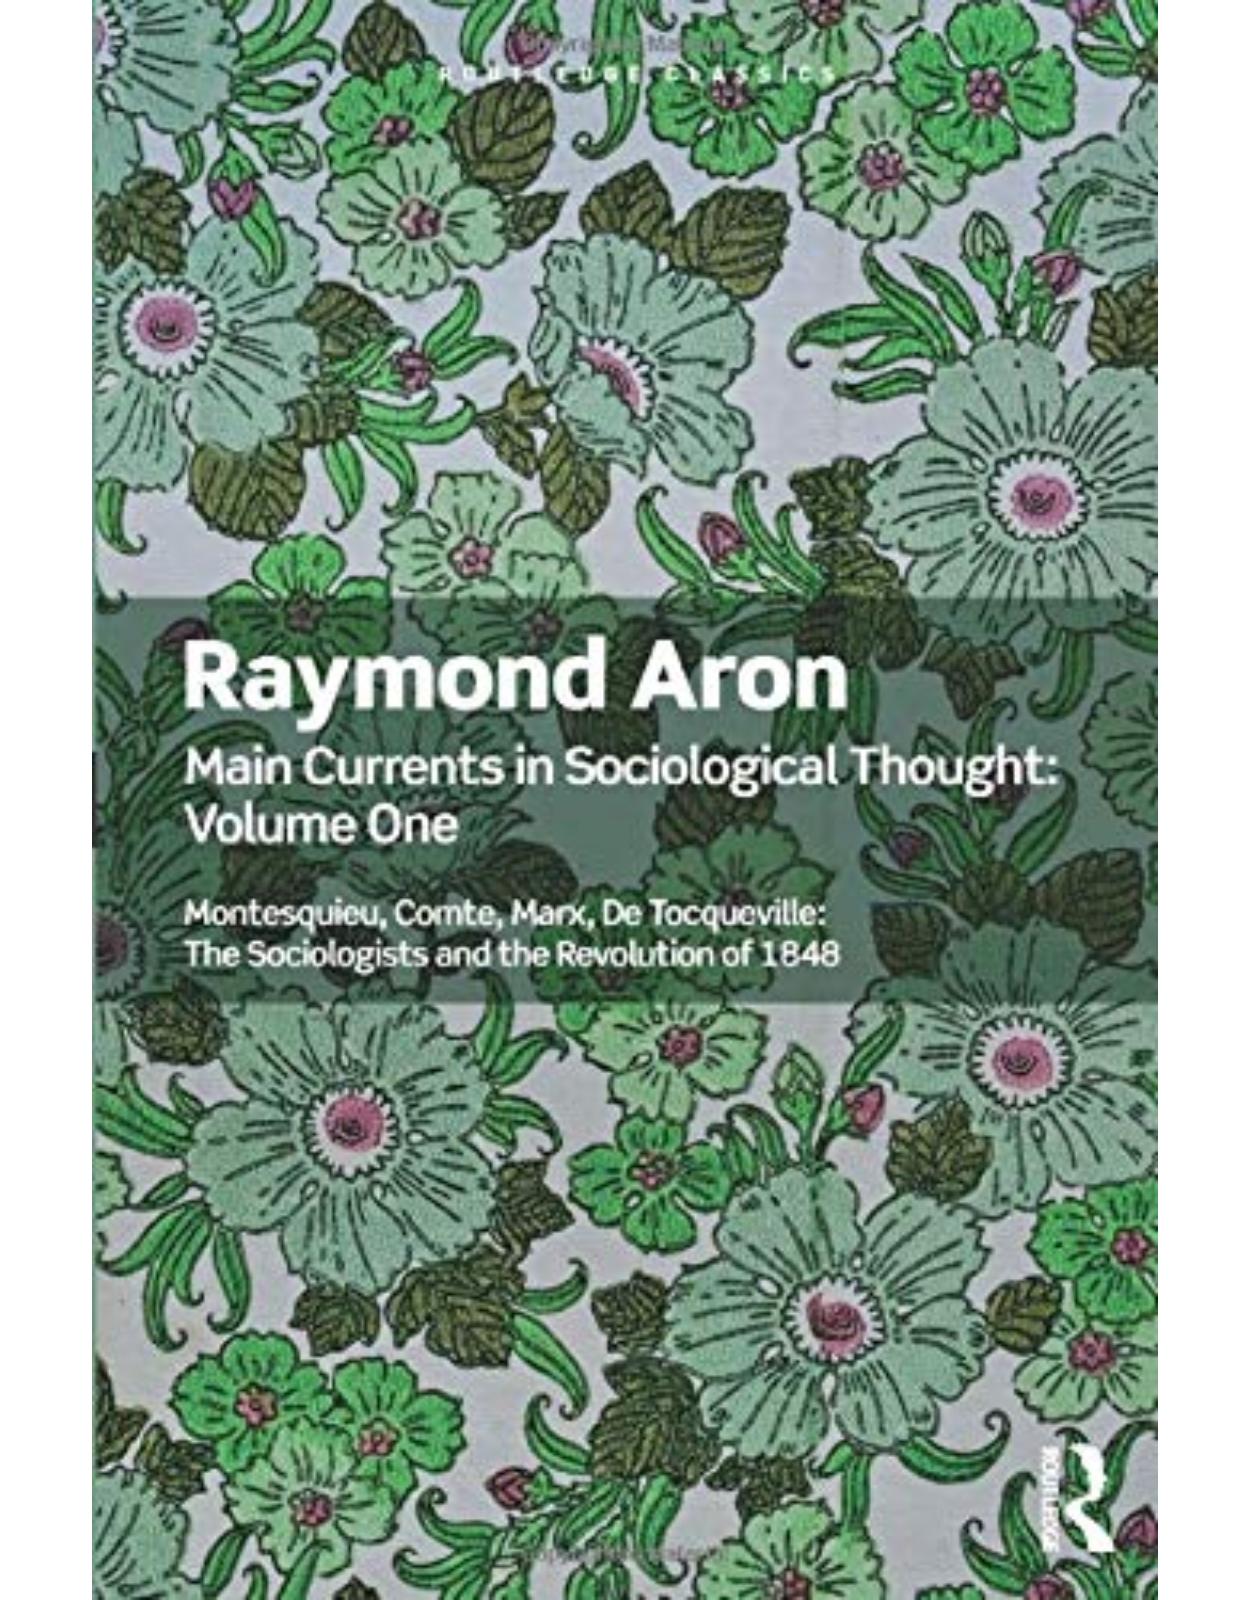 Main Currents in Sociological Thought: Volume One: Montesquieu, Comte, Marx, De Tocqueville: The Sociologists and the Revolution of 1848 (Routledge Classics) 